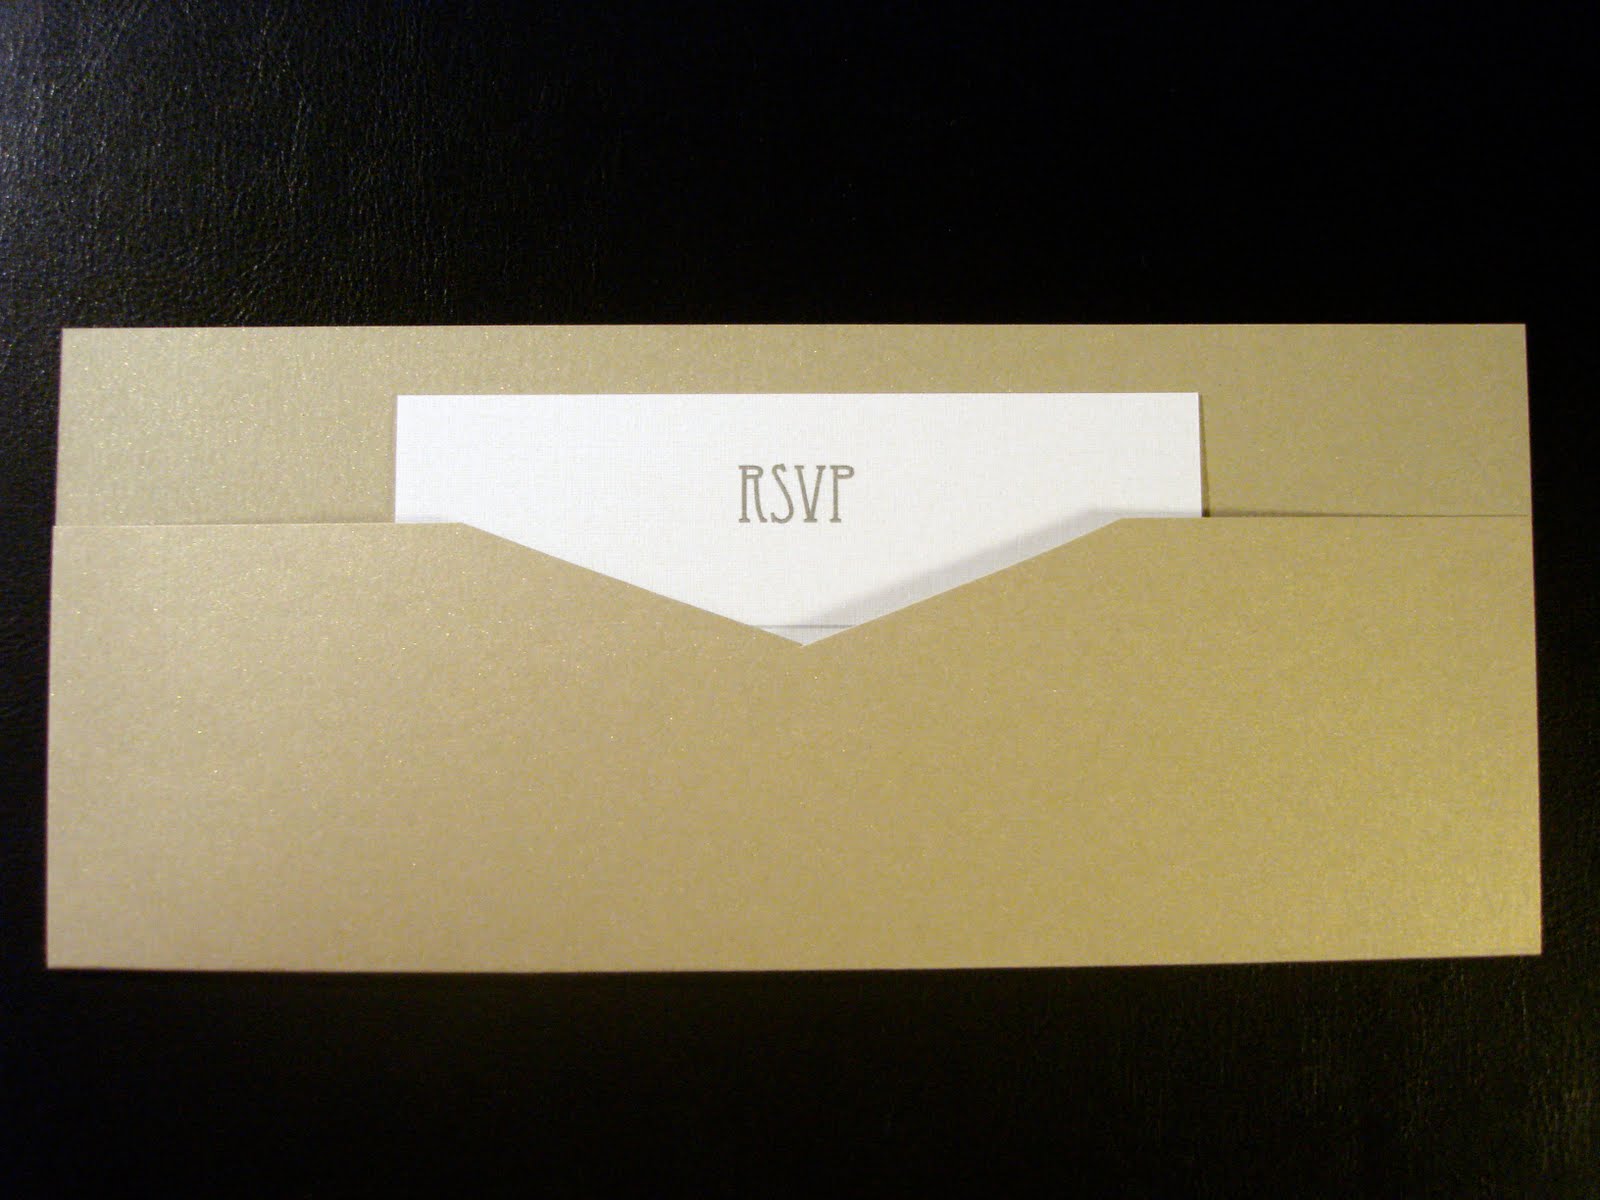 These gold invitations were